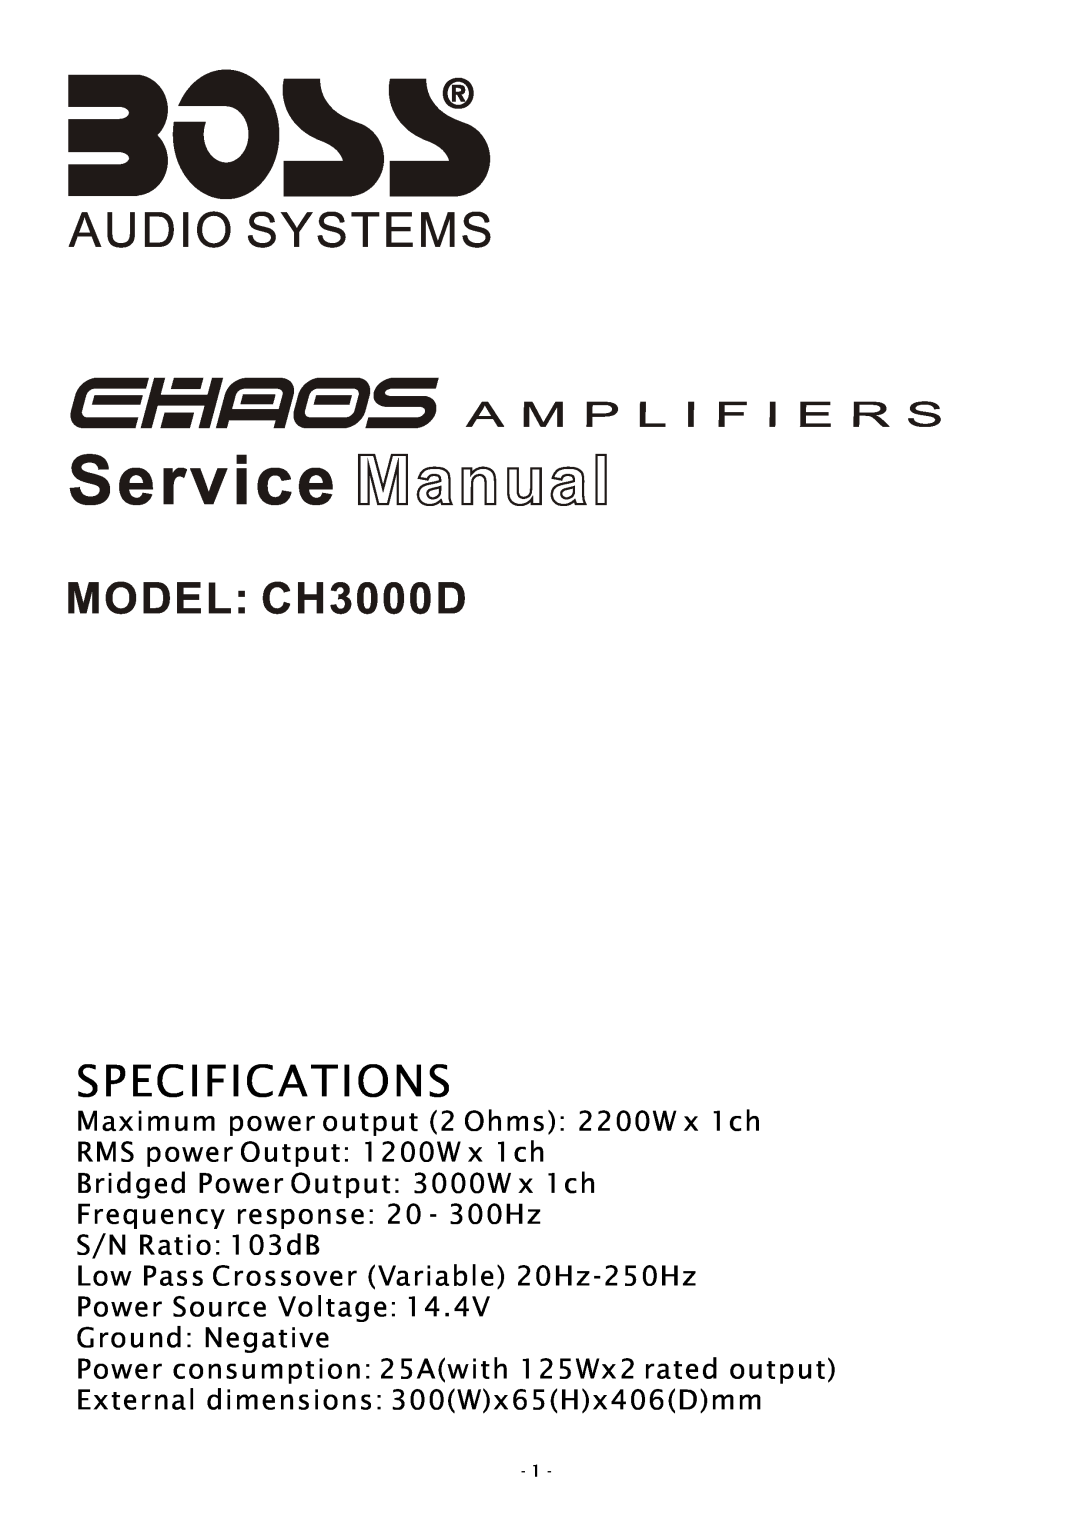 Boss Audio Systems specifications MODEL CH3000D, Specifications, Maximum power output 2 Ohms 2200W x 1ch 